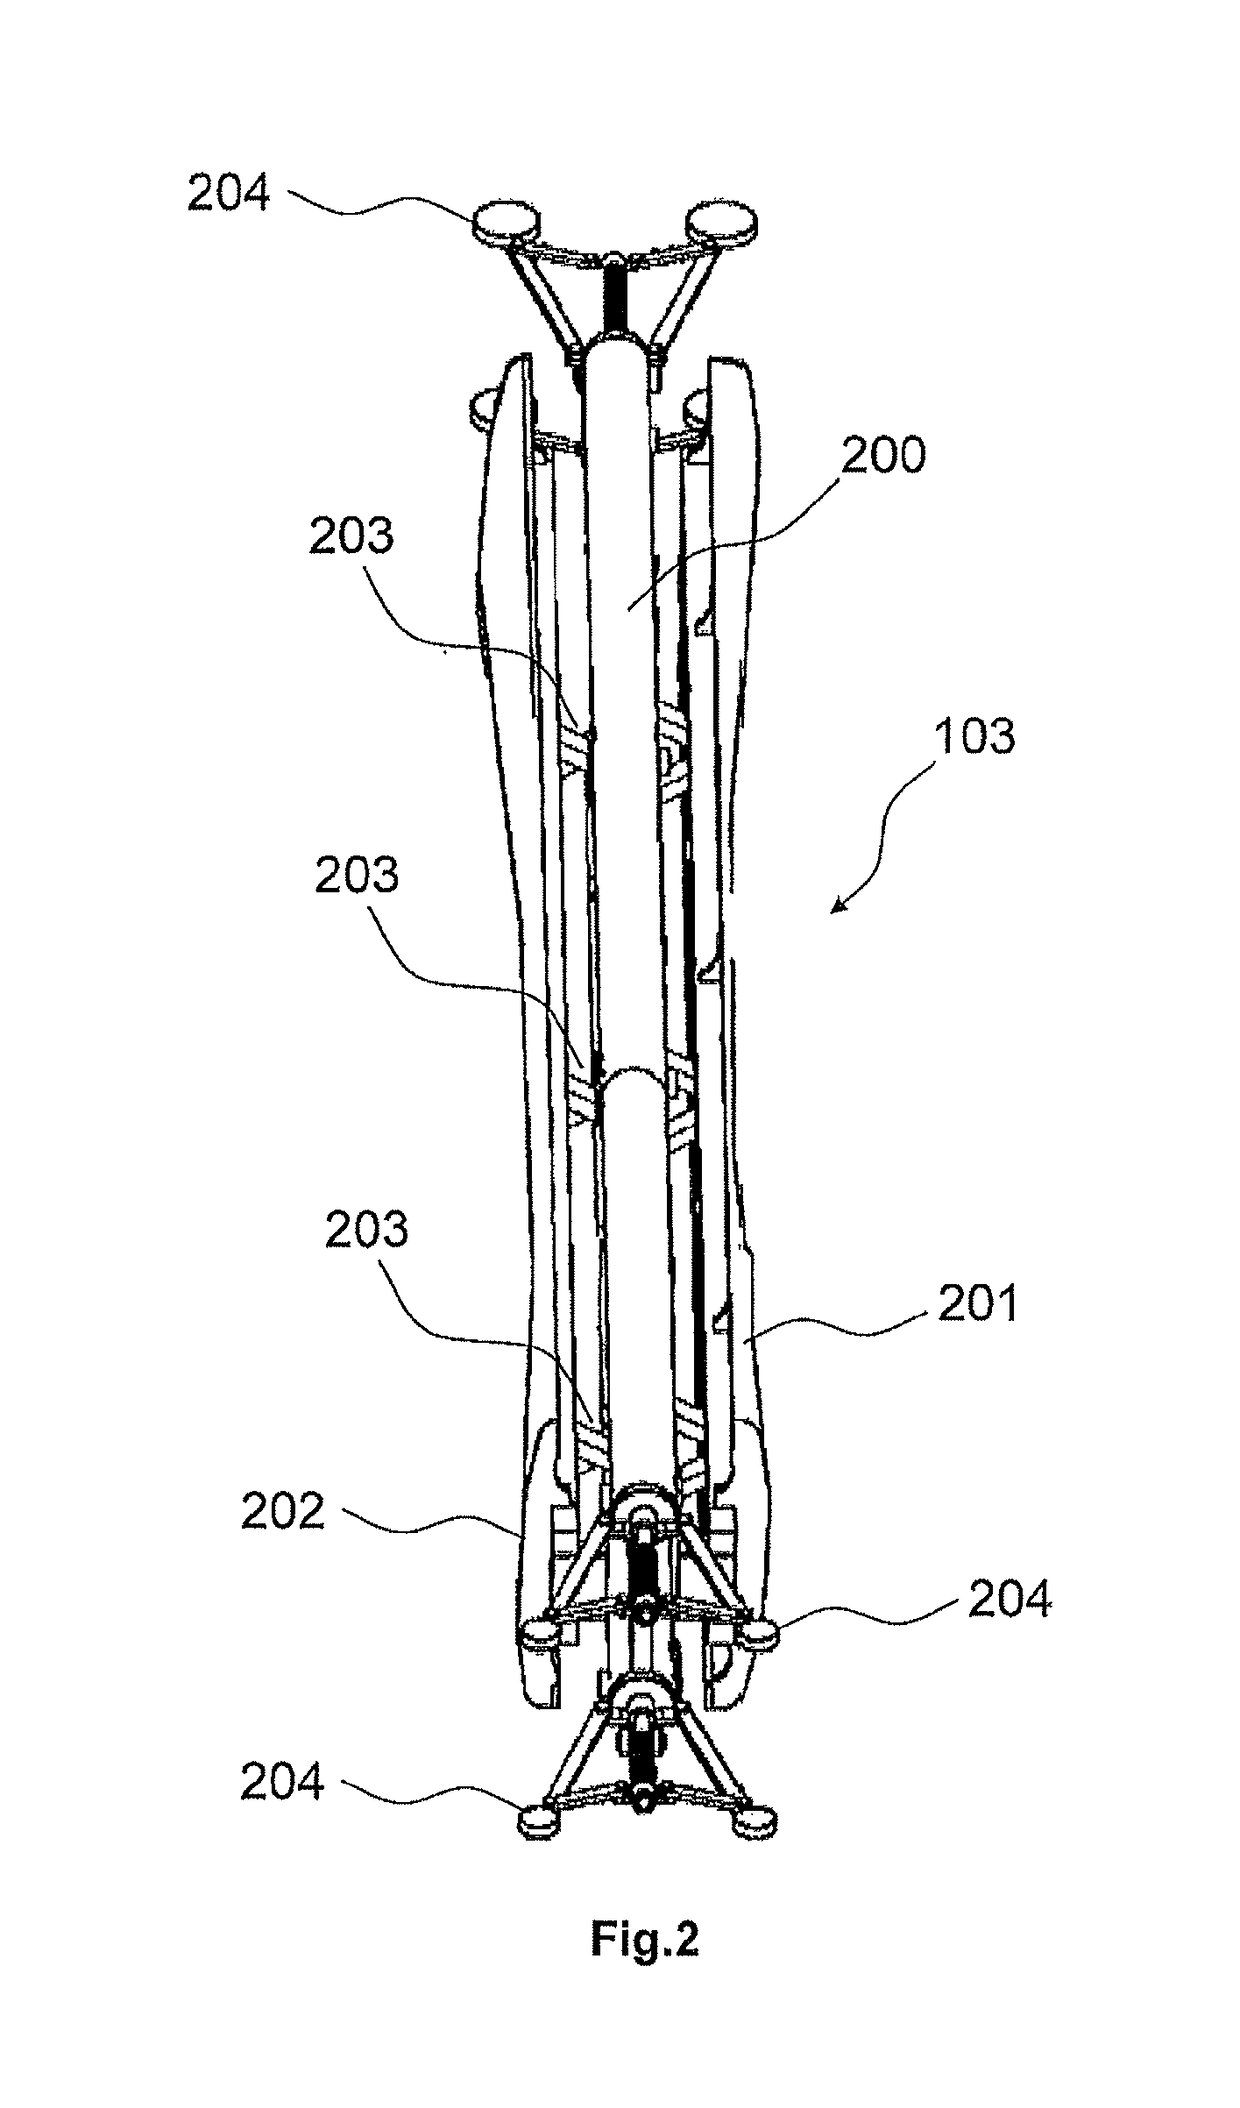 System and method for reinforcing a weakened area of a wind turbine blade